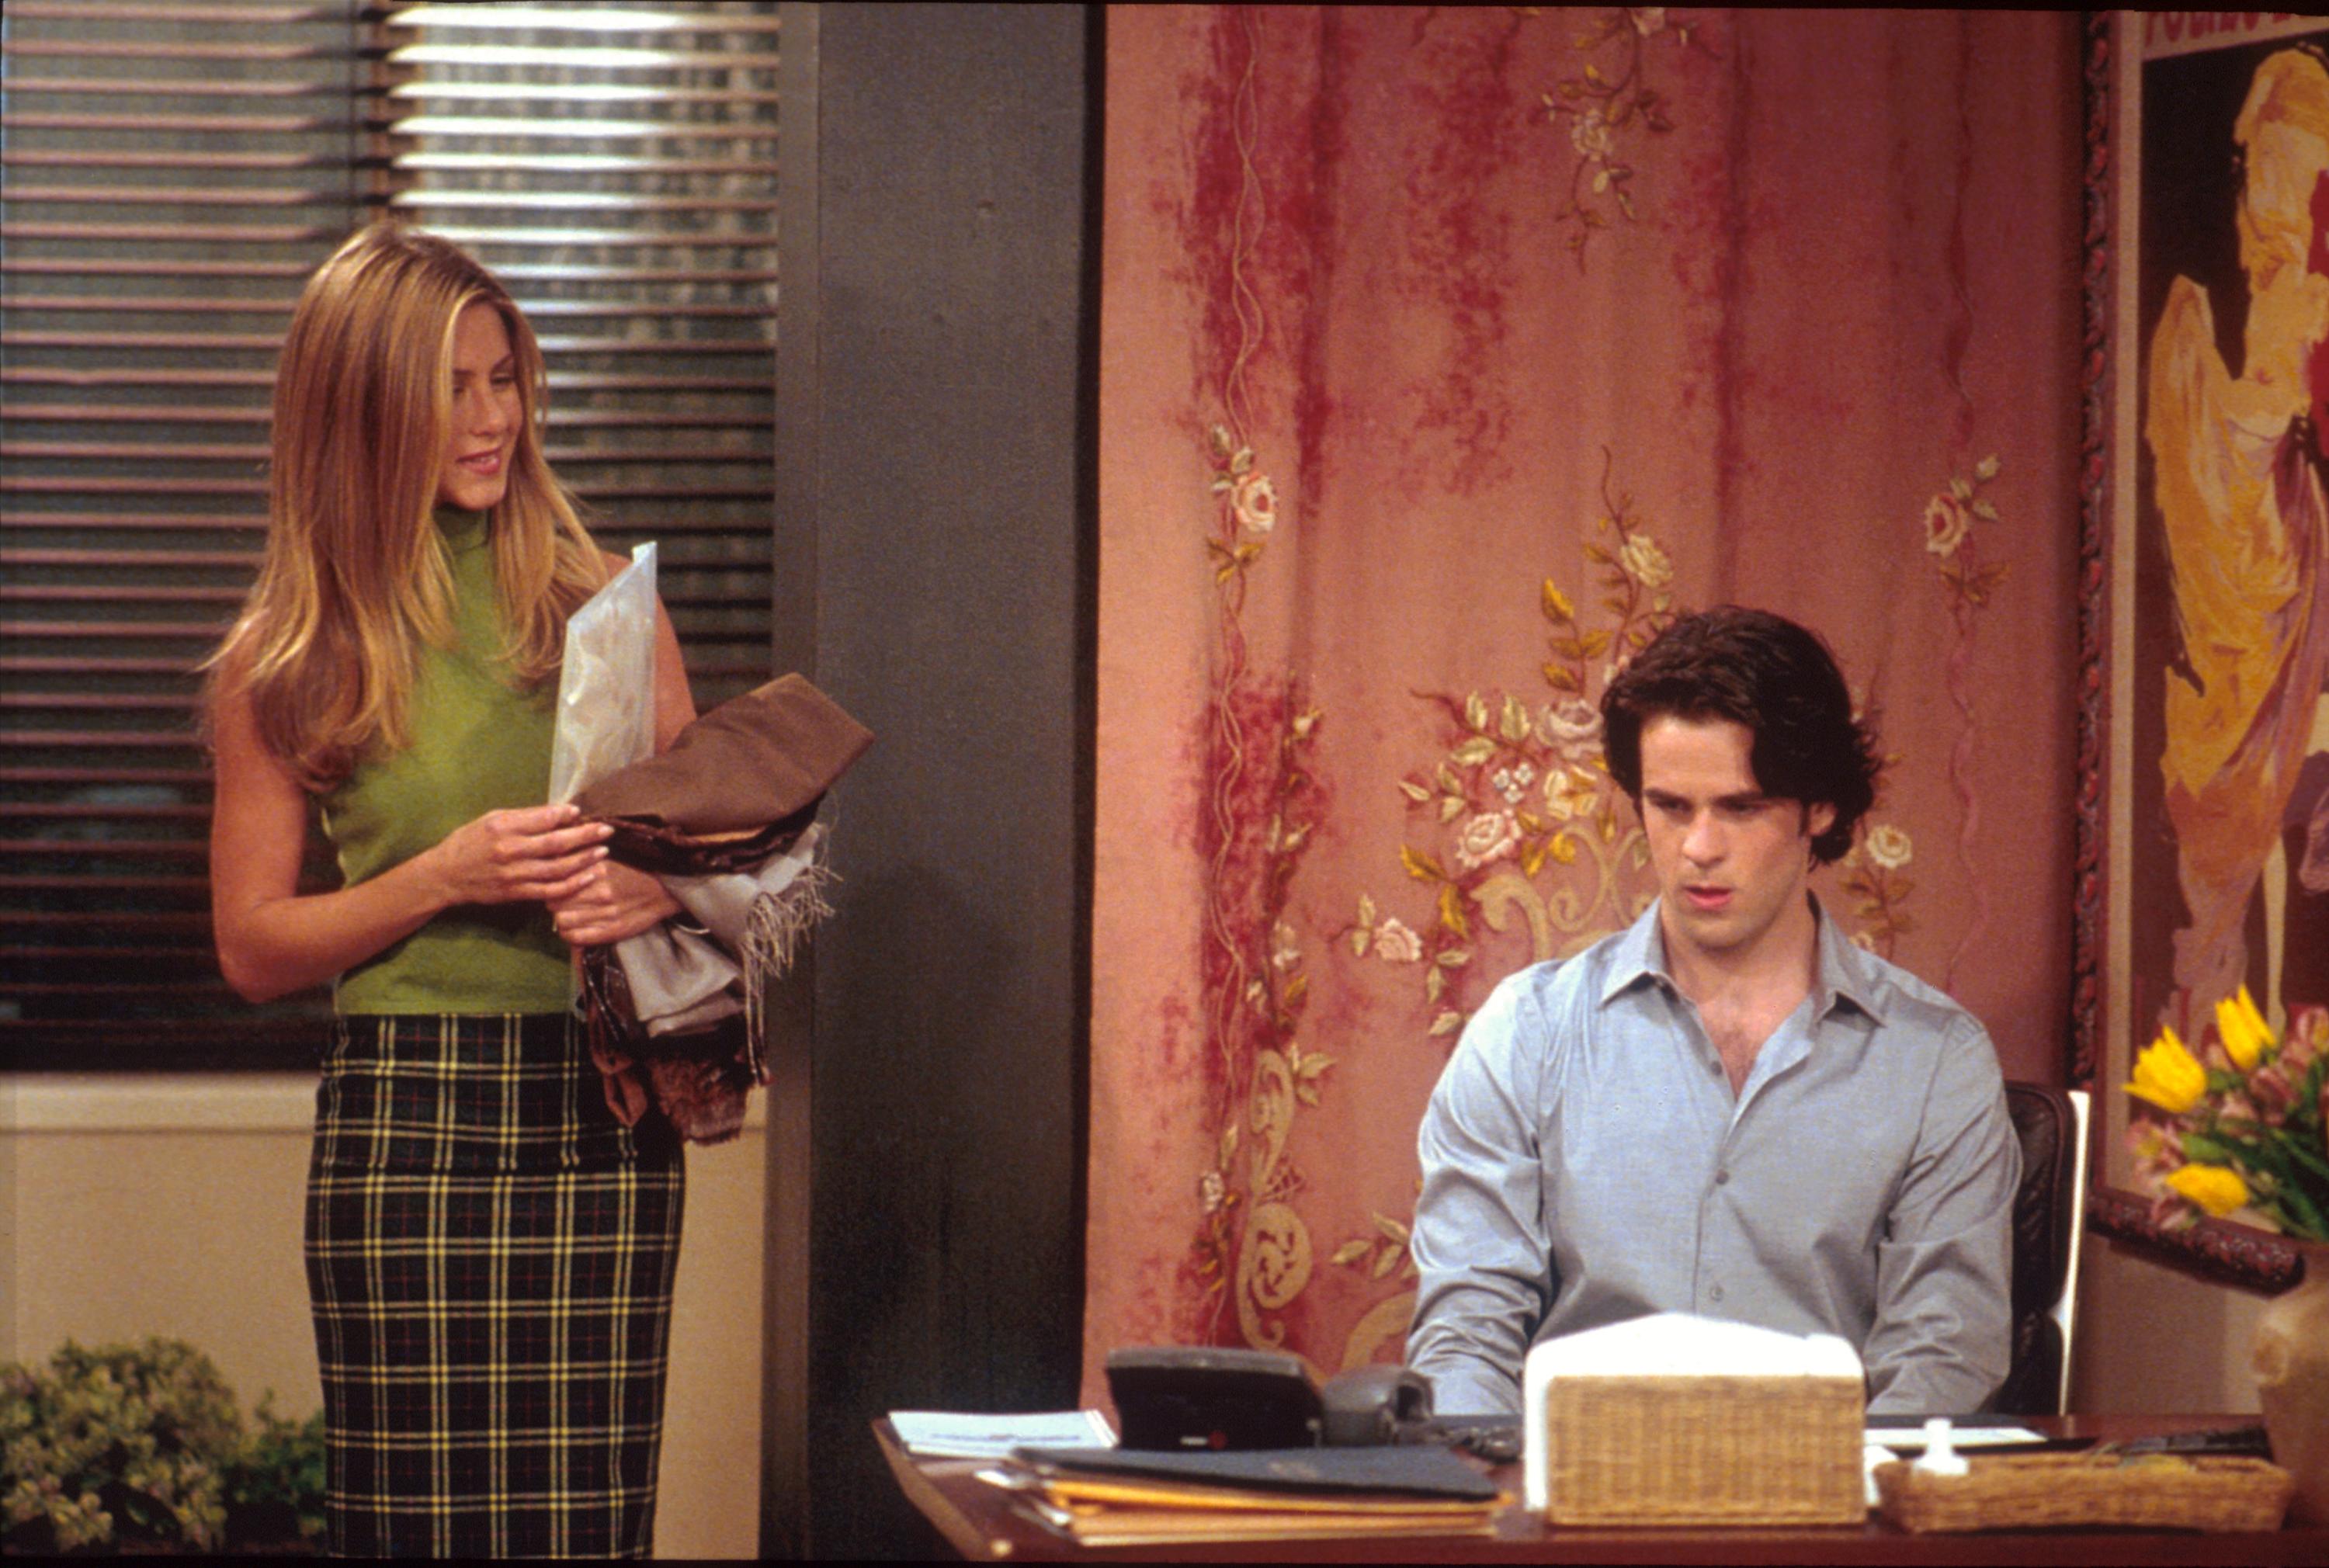 Eddie Cahill as Tag Jones and Jennifer Aniston as Rachel Green in an episode of 'Friends'